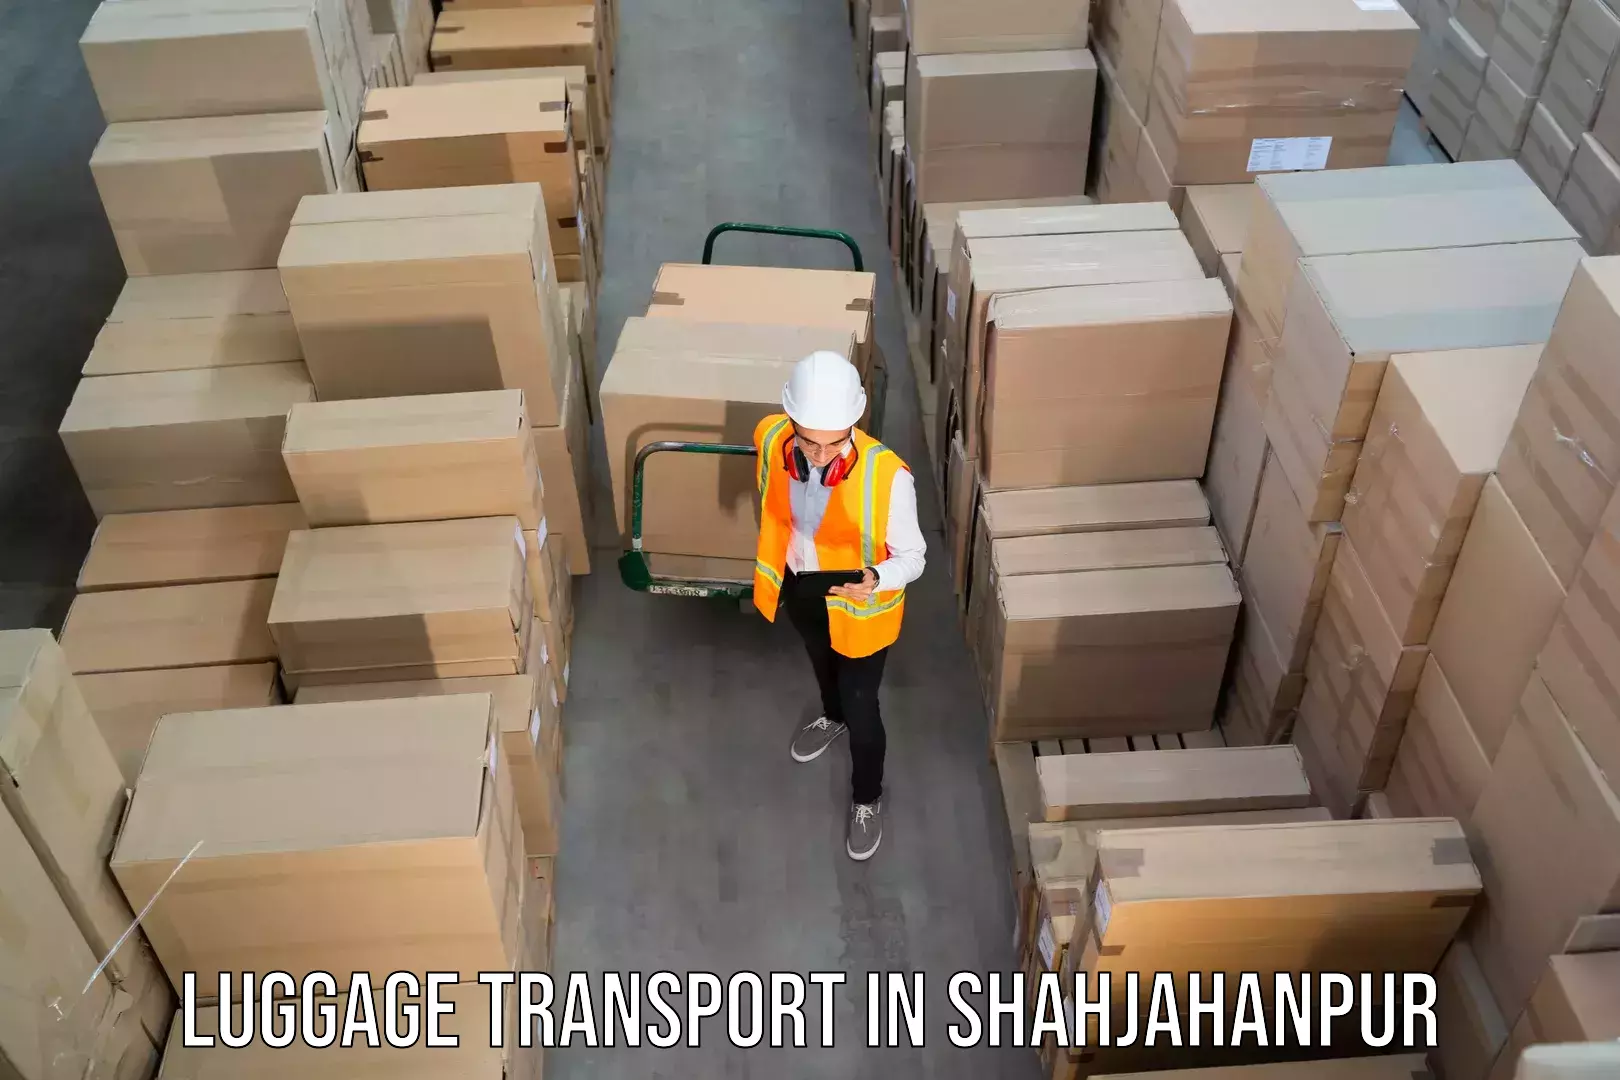 Express luggage delivery in Shahjahanpur